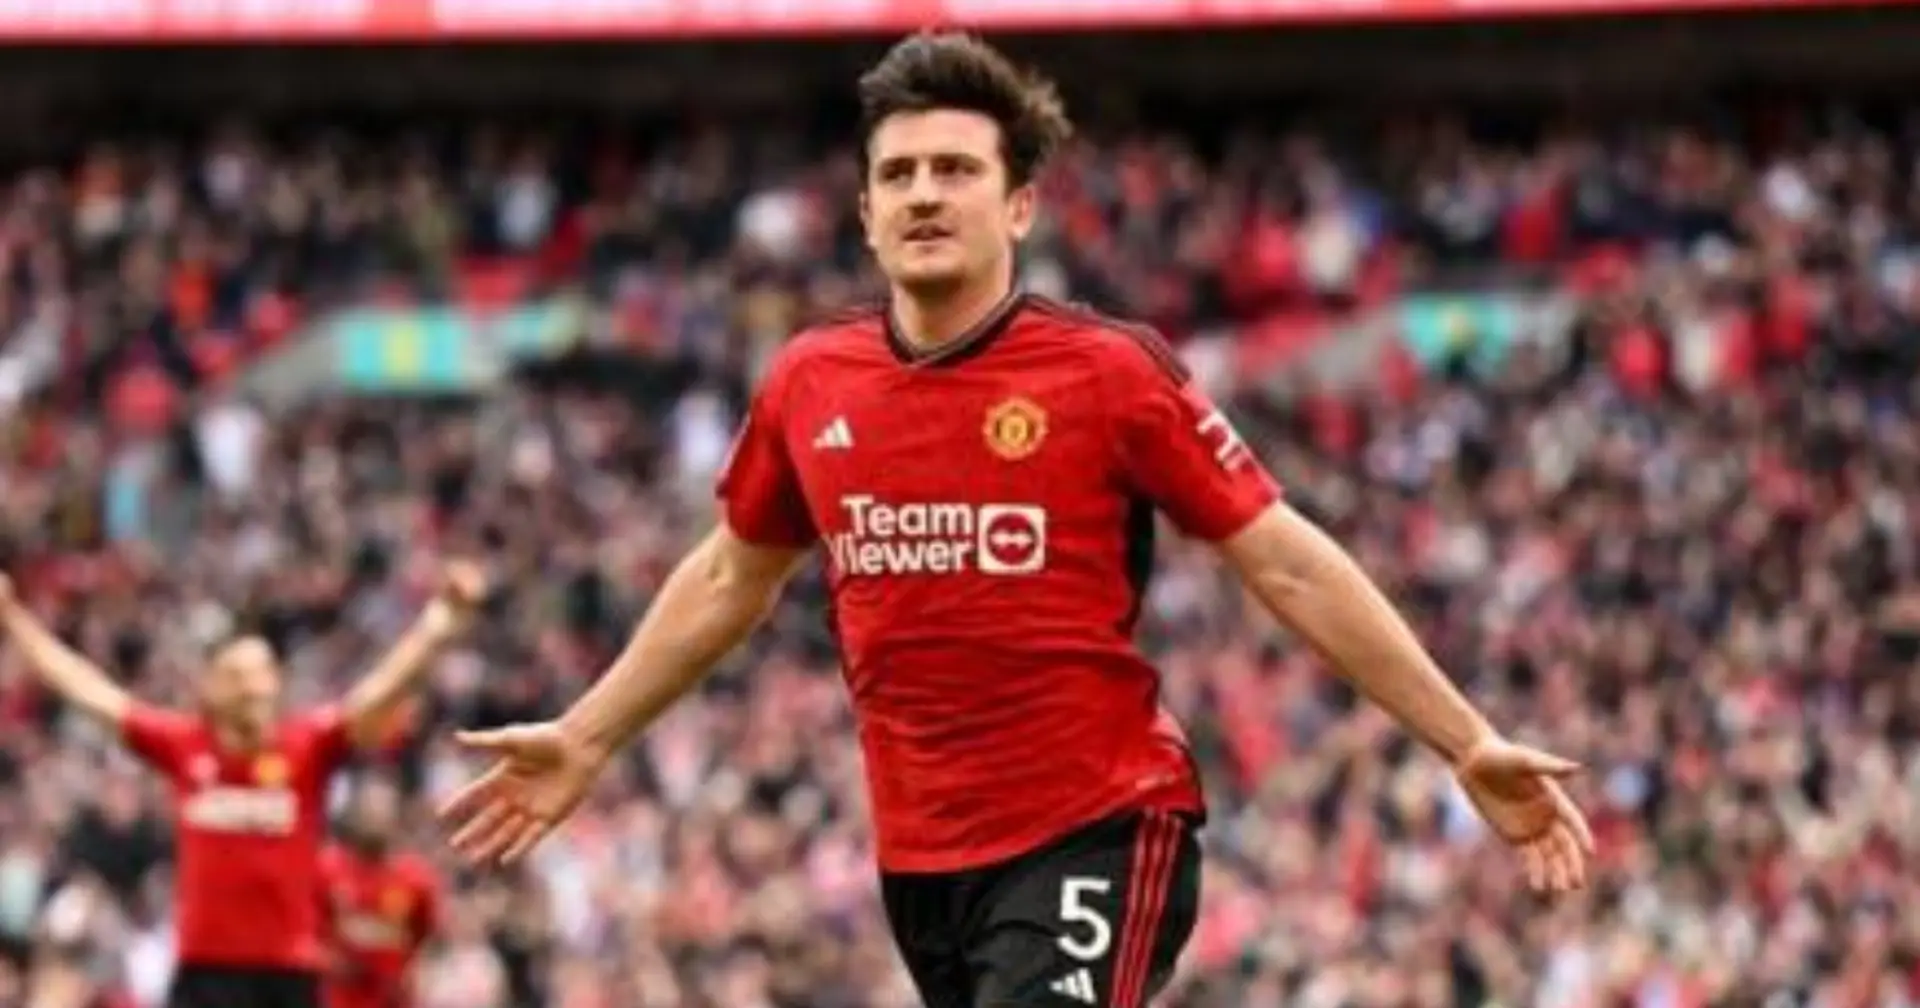 'His effort and determination stand tall': Man United fans happy for Harry Maguire